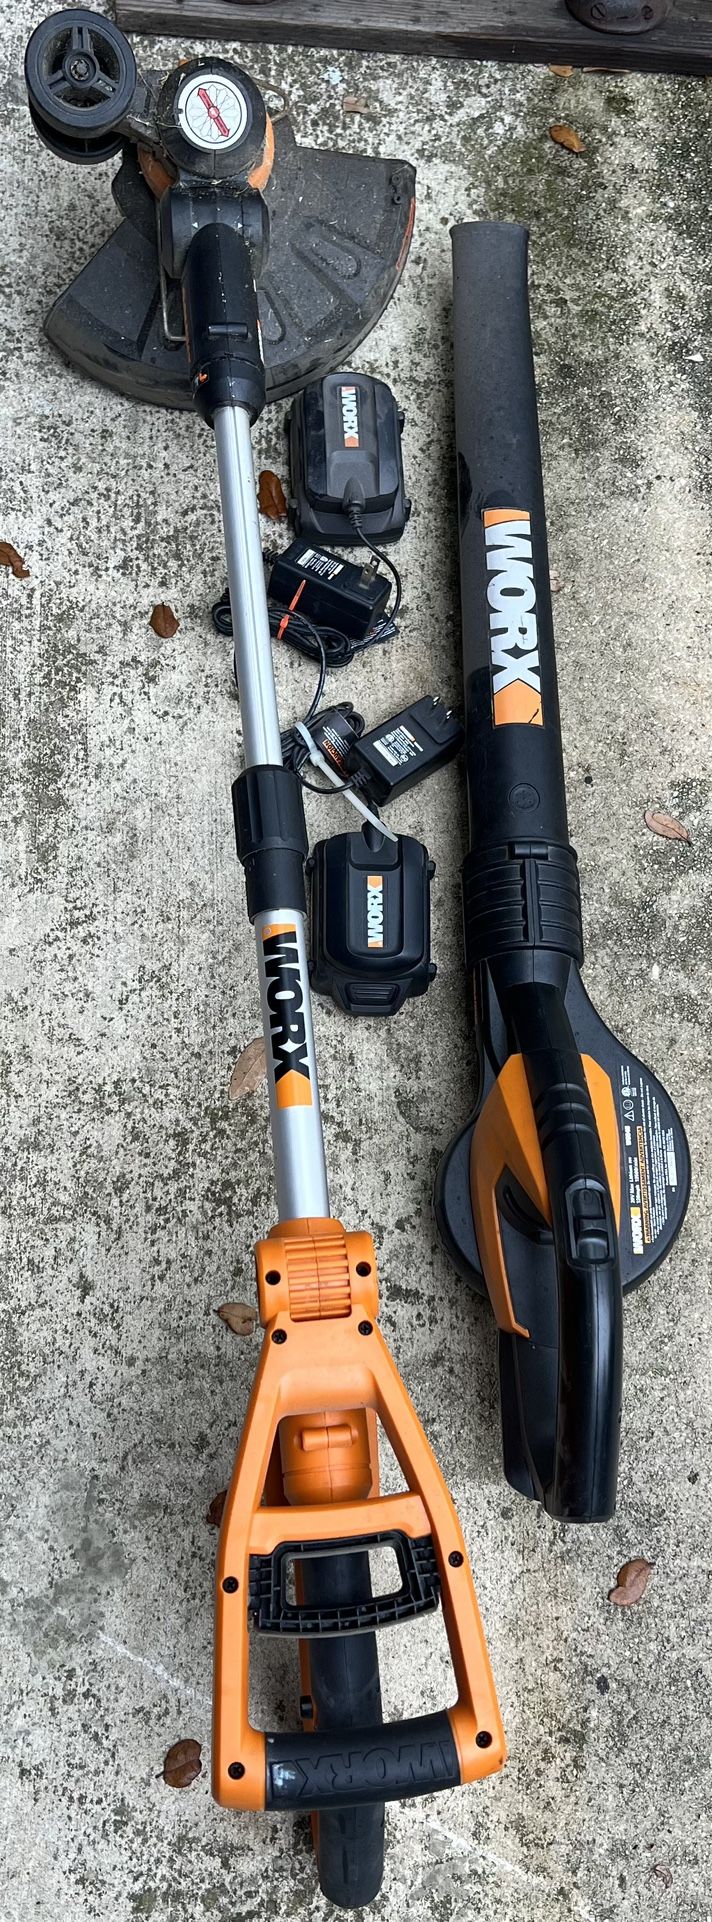 Worx Leaf blower and Weed eater